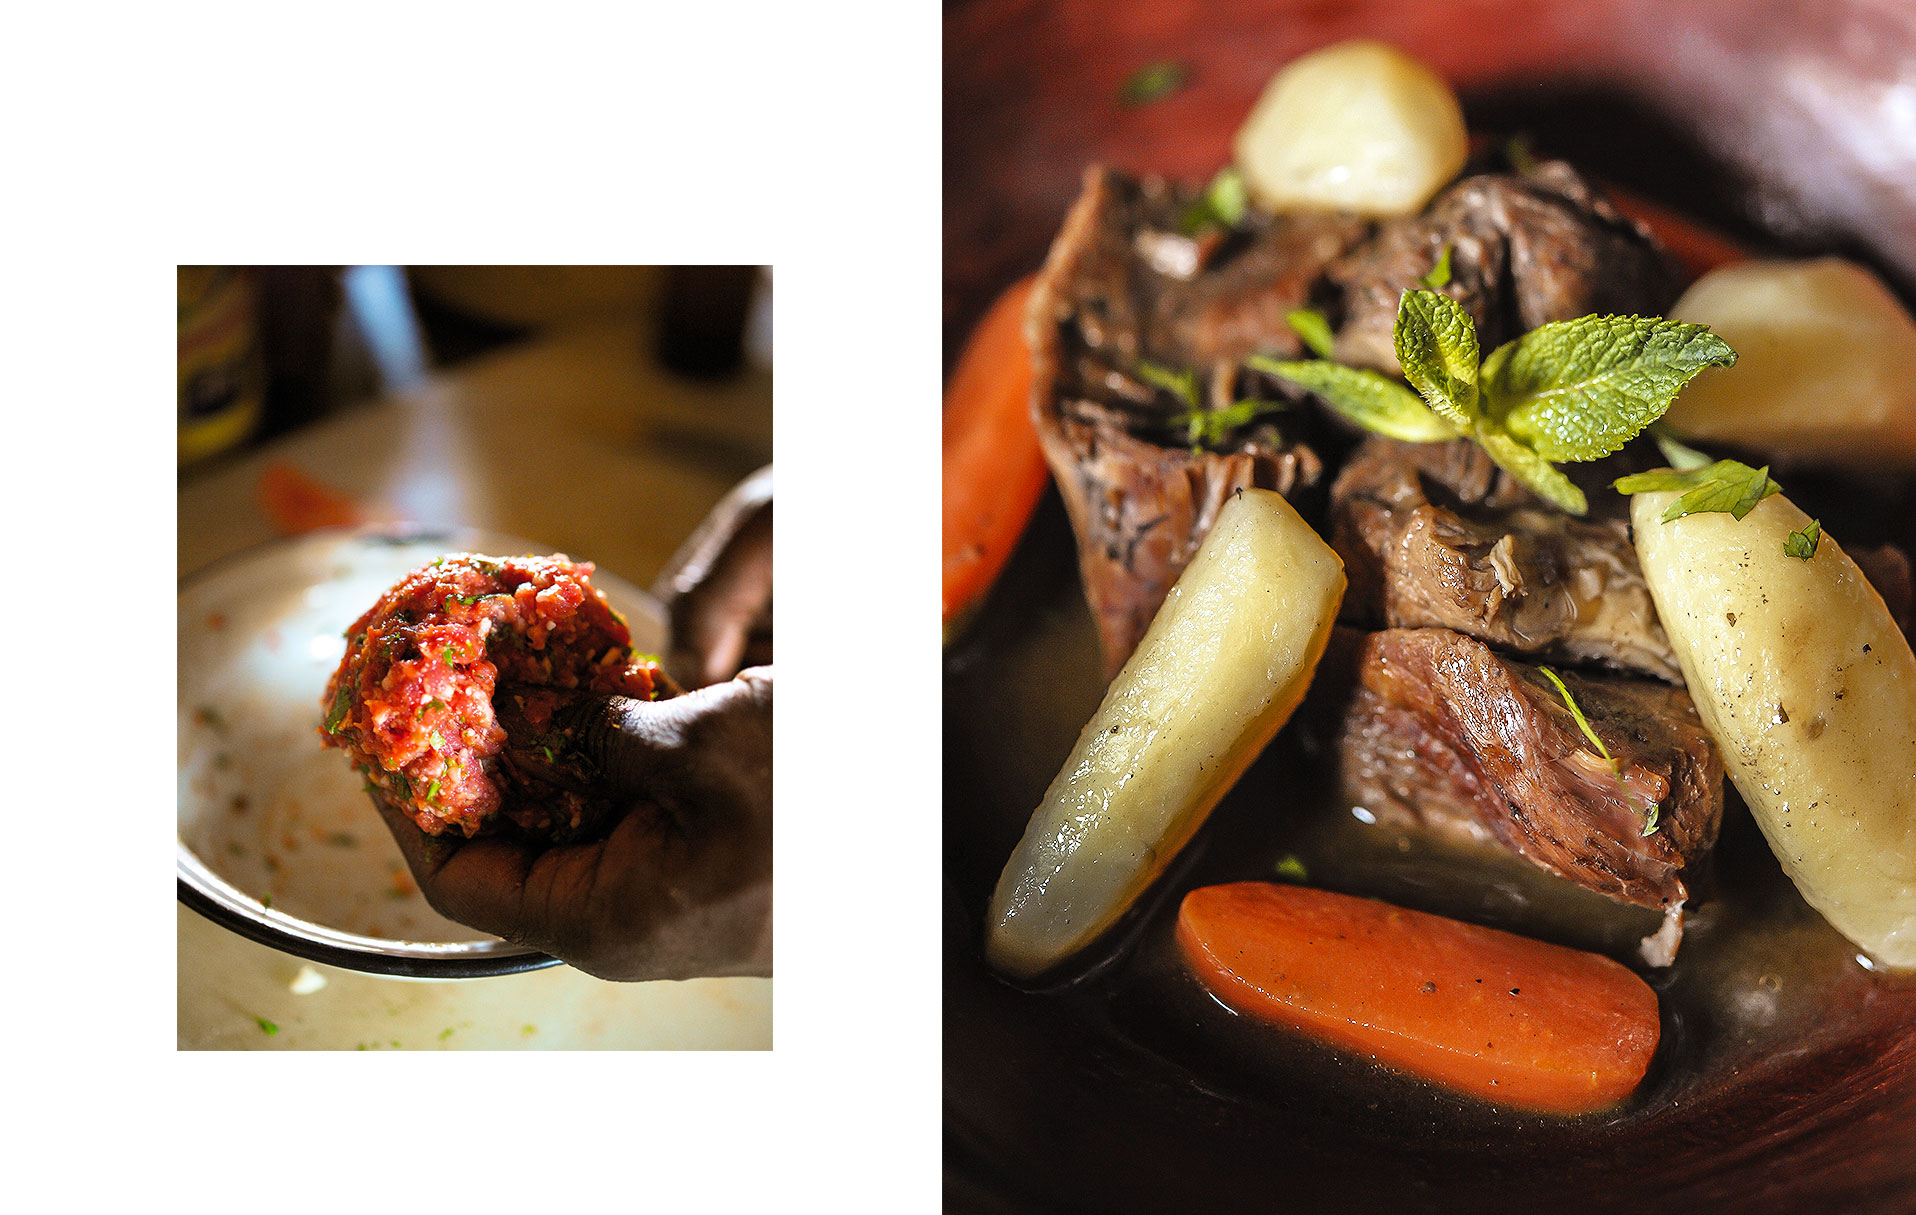 Meat and vegetable dishes, Moroccan recipes & gastronomy holidays – La Pause Morocco.